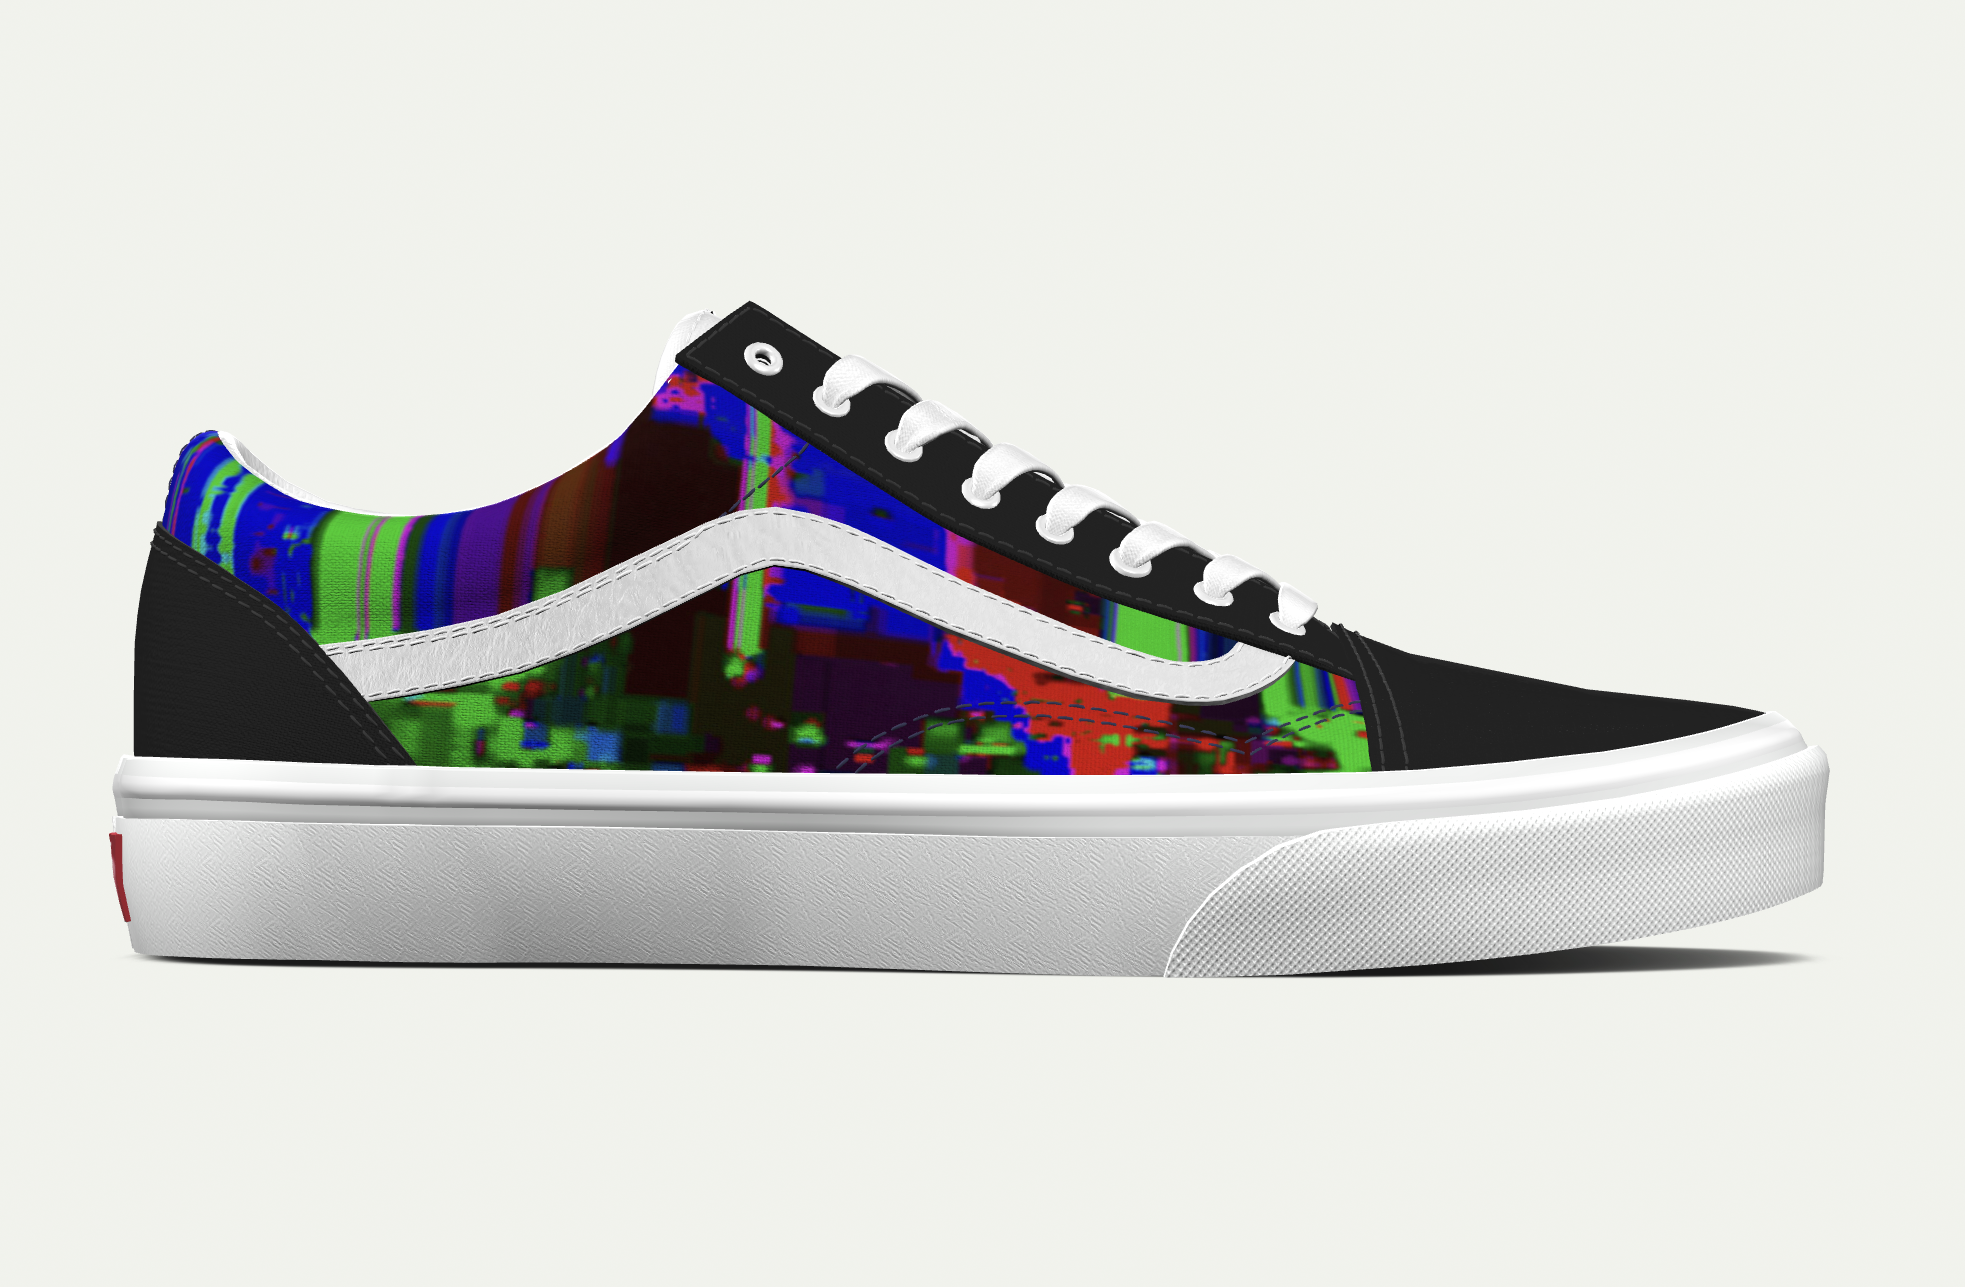 Max Headroom Limited Edition Vans Shoe 1 of 20